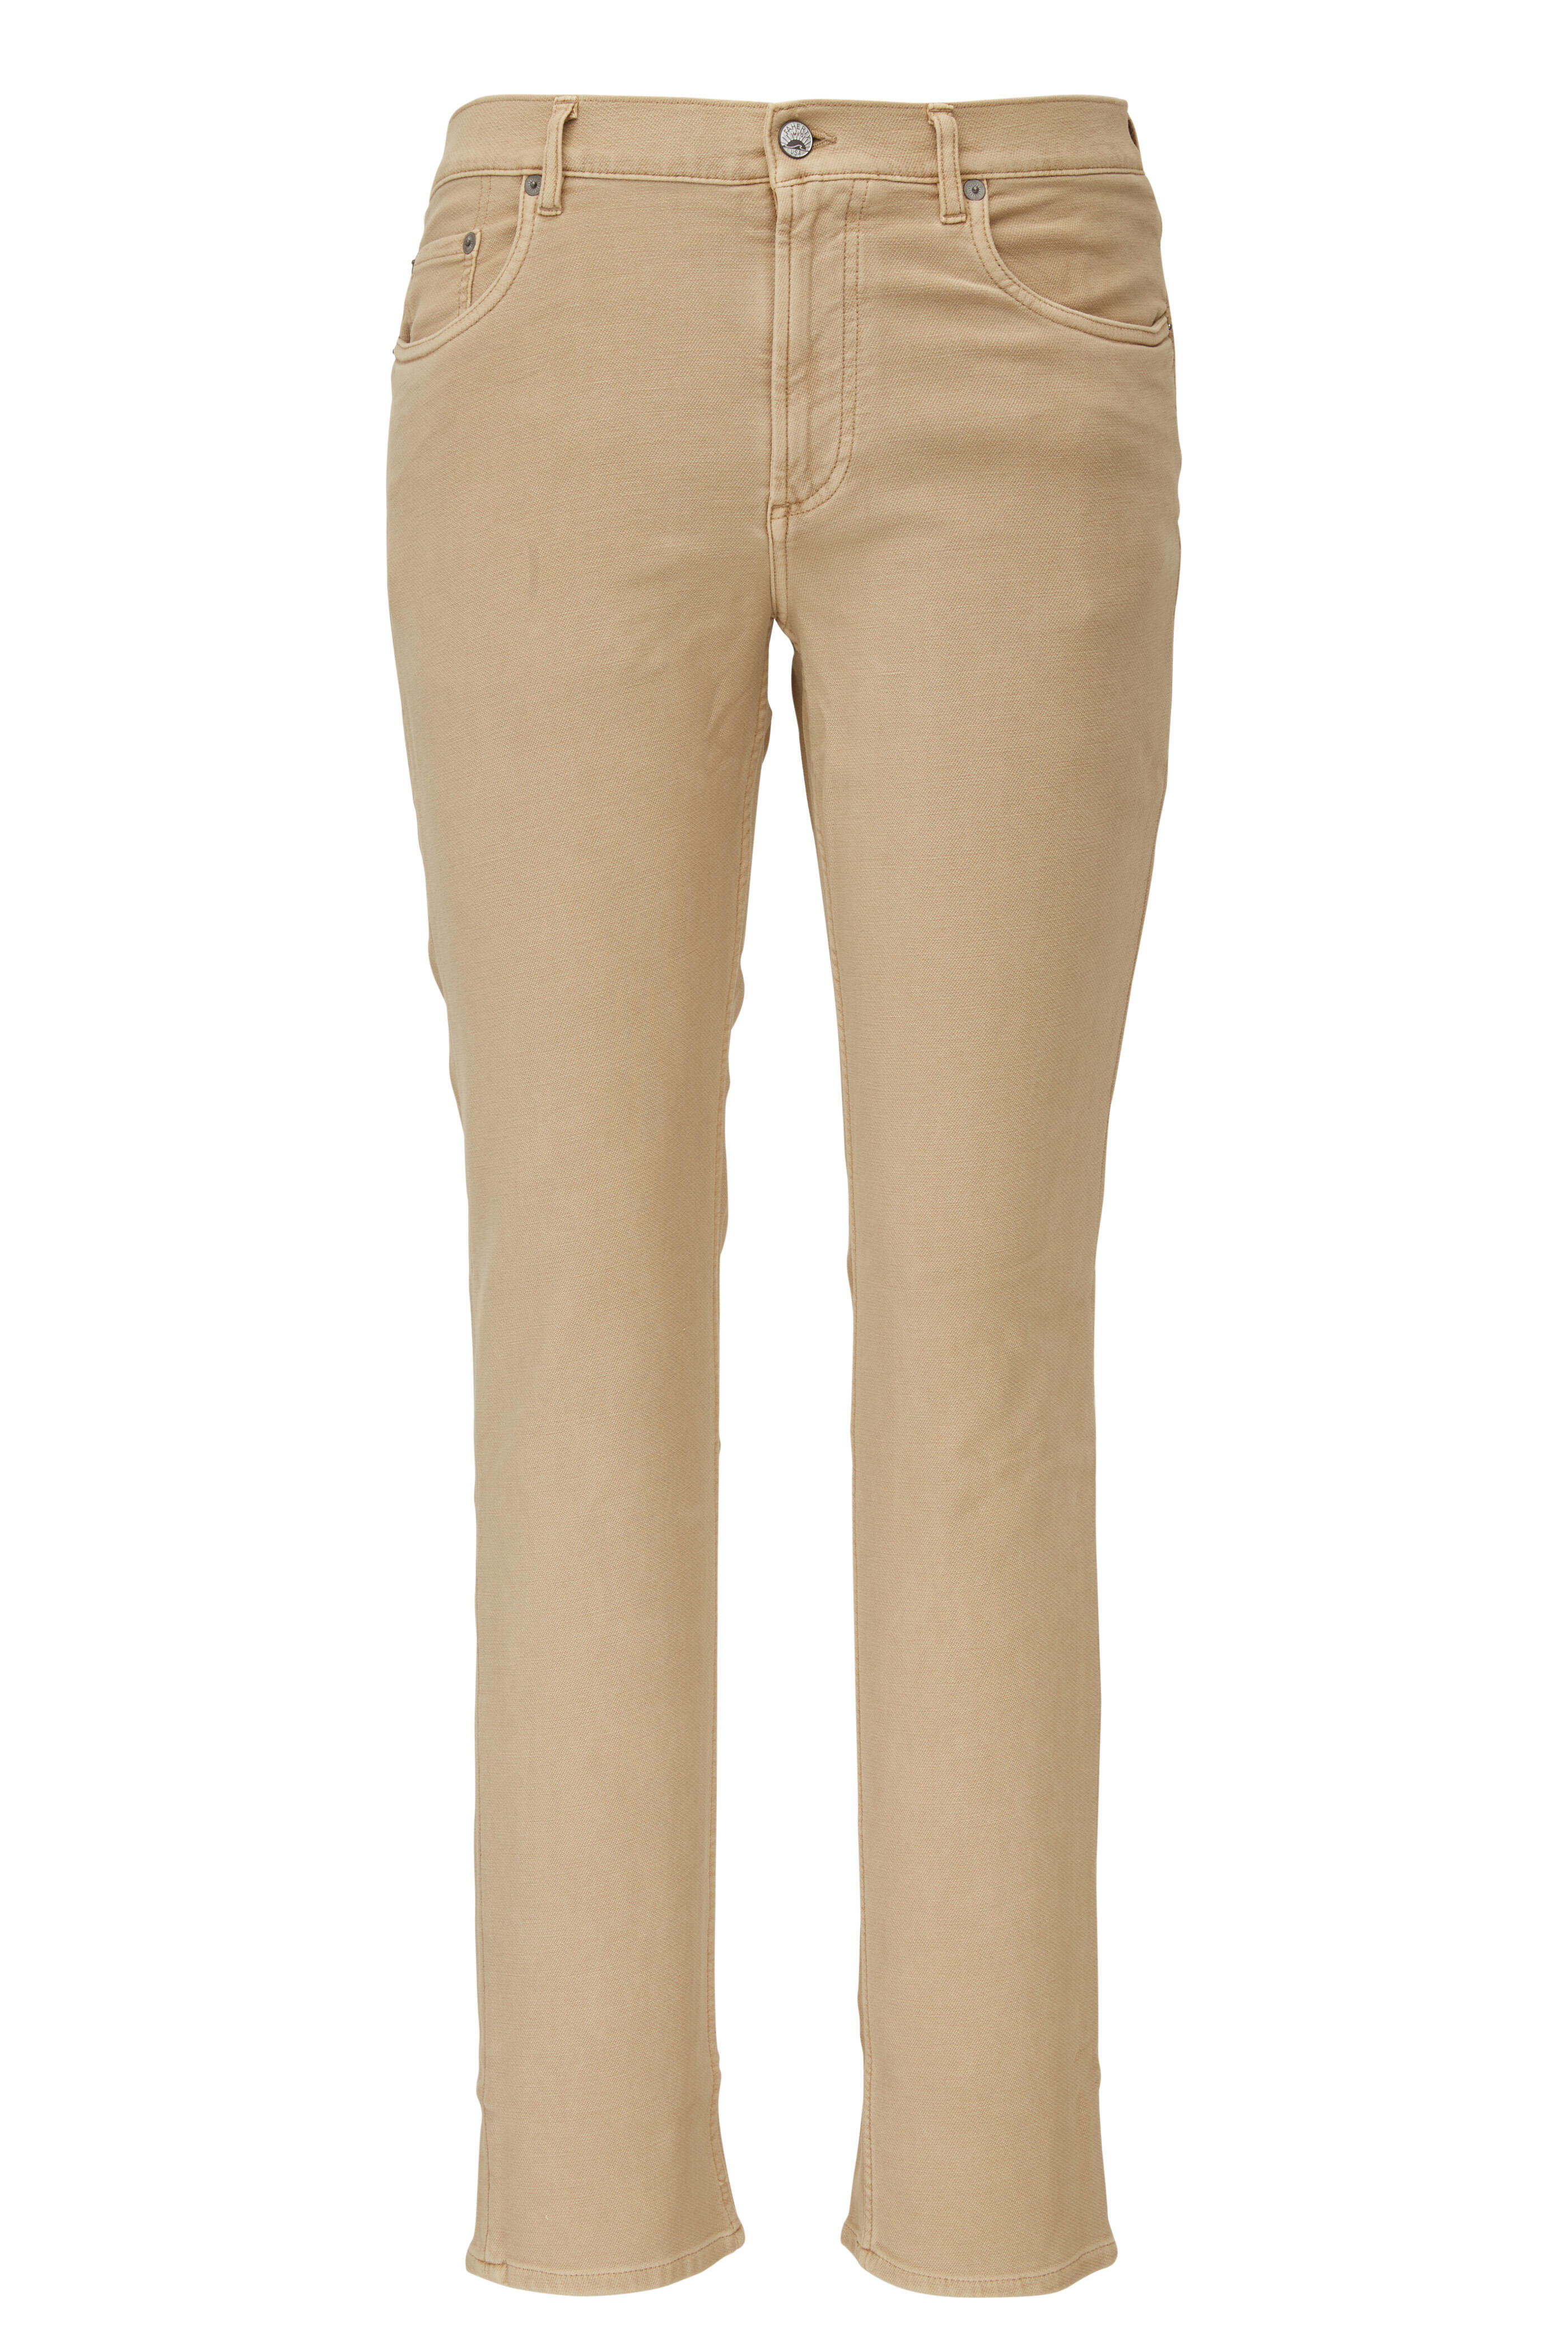 Faherty Brand - Sand Stretch Terry Five Pocket Pant